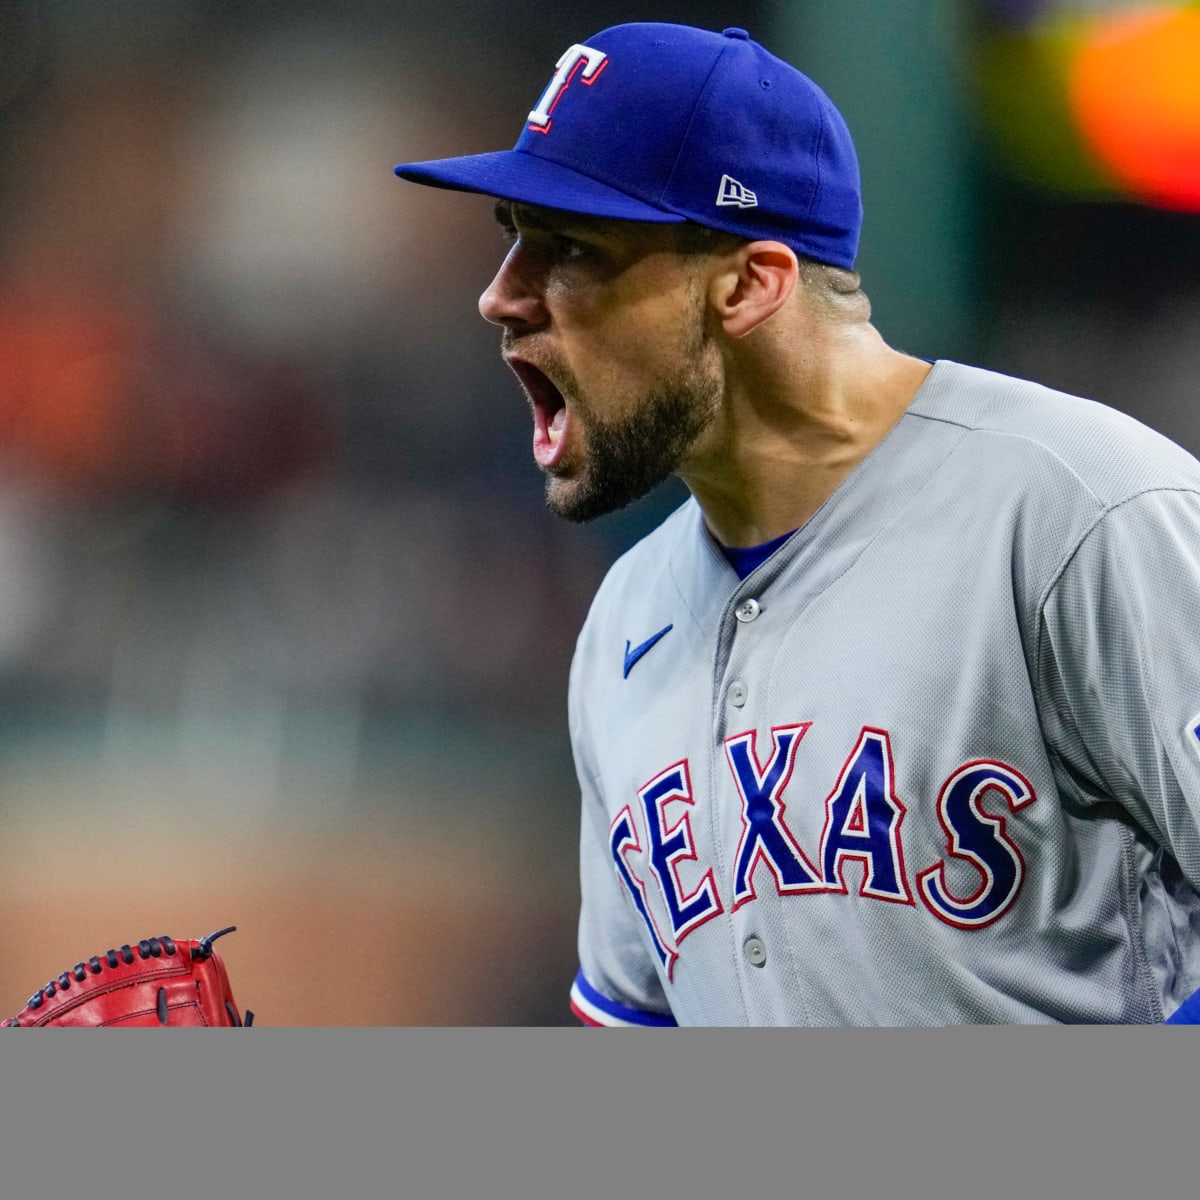 Texas Rangers Pulling for Adolis Garcia, Nathan Eovaldi to Make MLB  All-Star Team - Sports Illustrated Texas Rangers News, Analysis and More